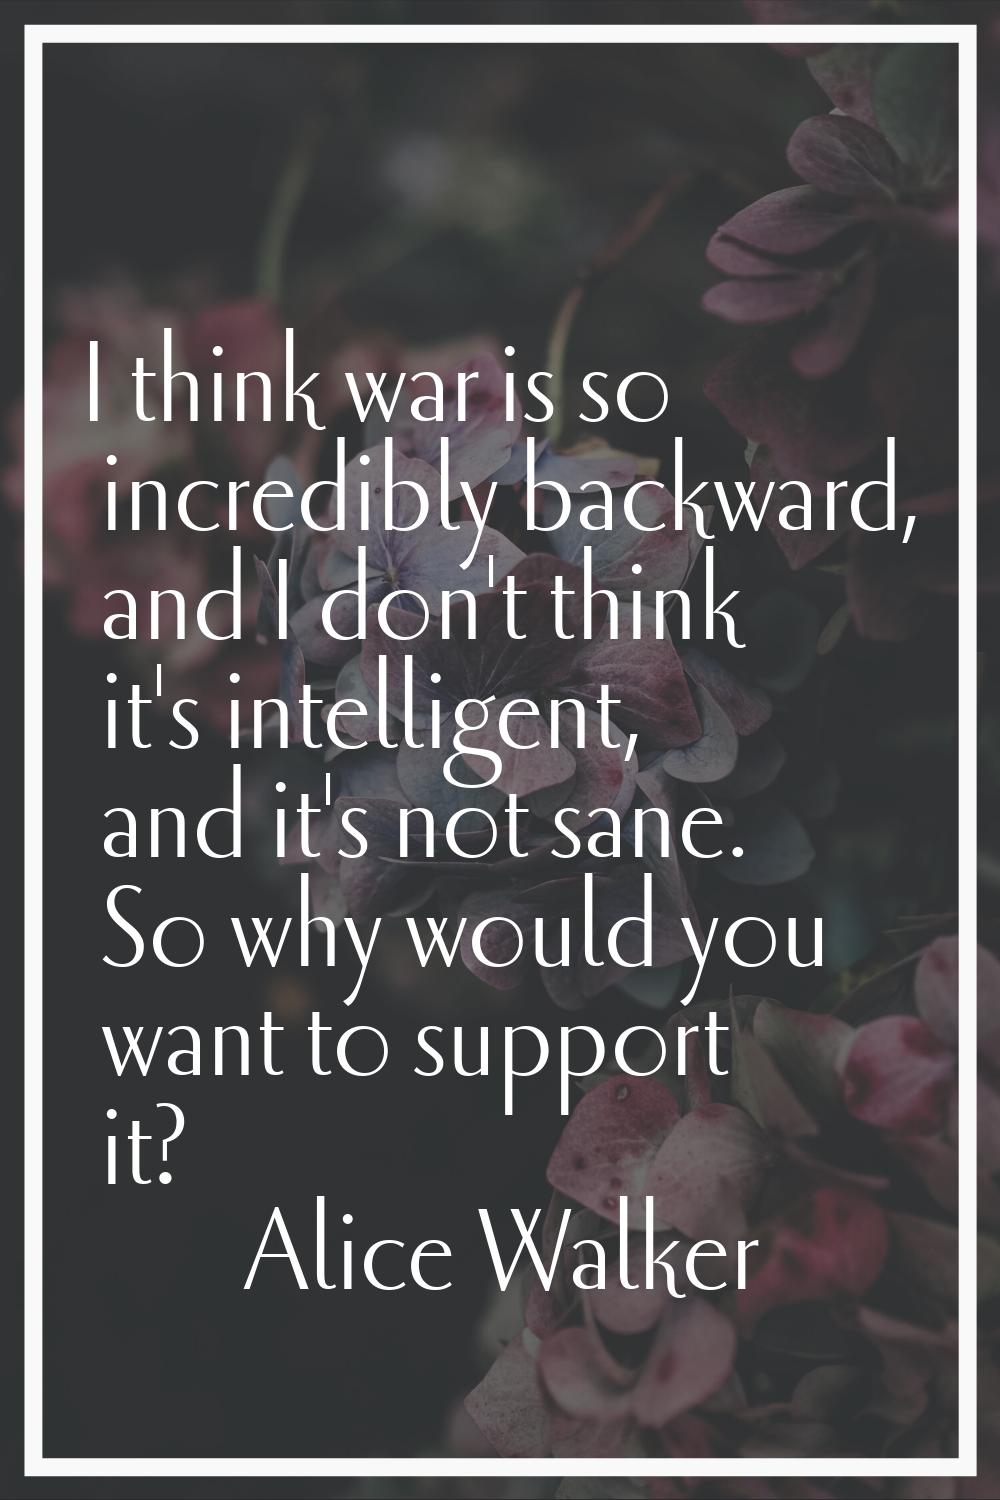 I think war is so incredibly backward, and I don't think it's intelligent, and it's not sane. So wh